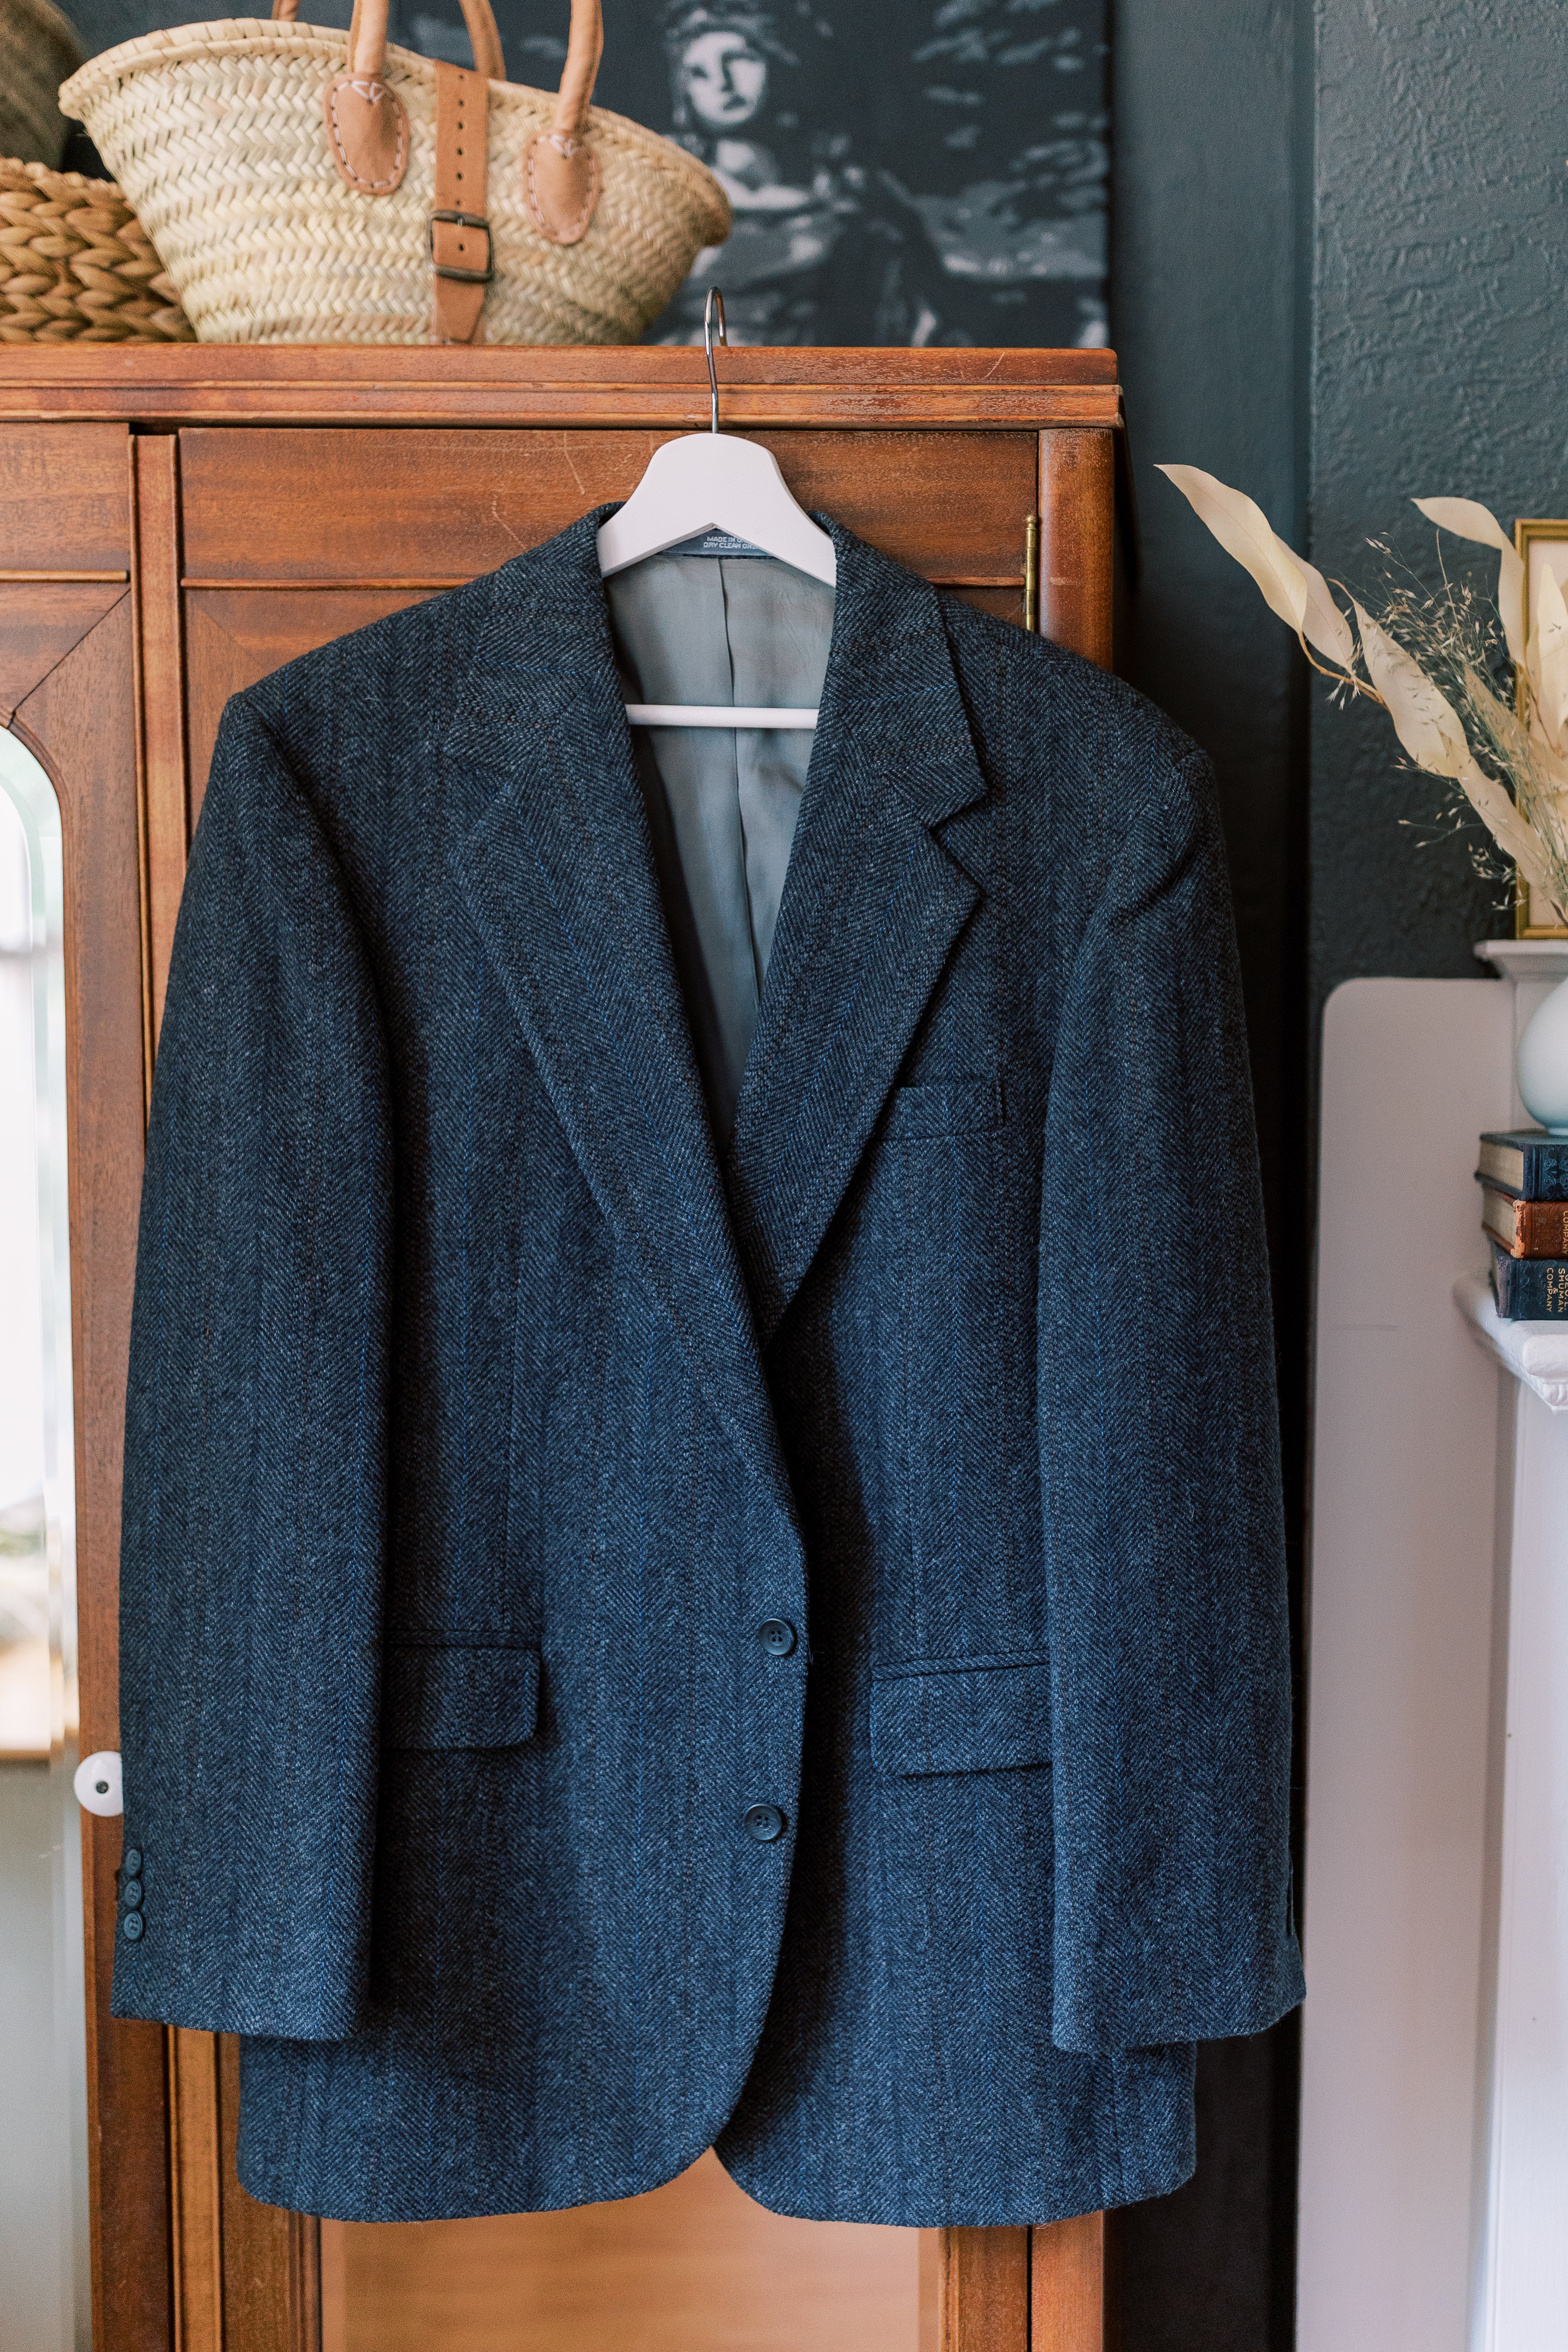 Made in the USA Men's Wool Blazer